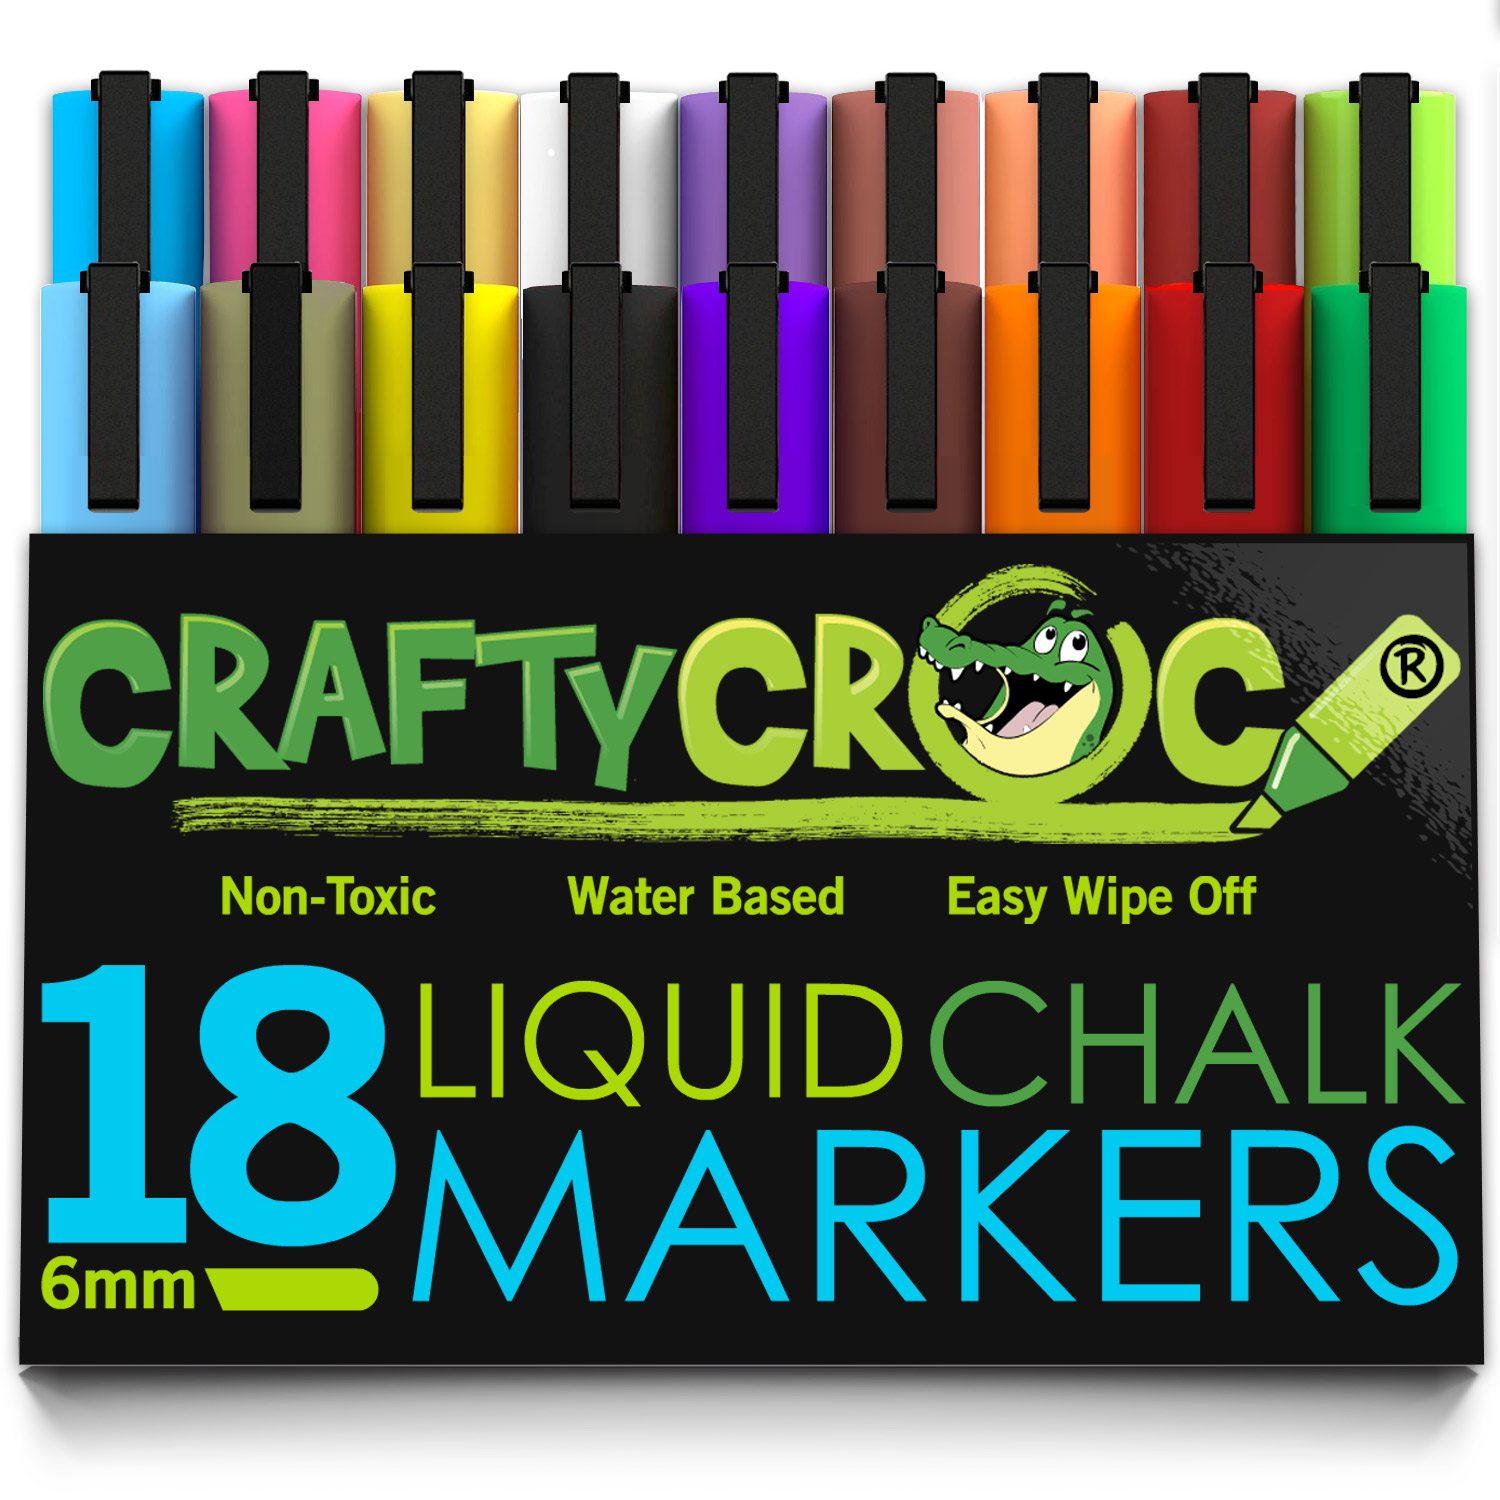 CraftyCroc Liquid Chalk Markers - great gift for crafters! As featured on the Holiday Gift Guide for Crafters & DIYers on @homelifeabroad.com #crafting #crafter #diy #giftideas